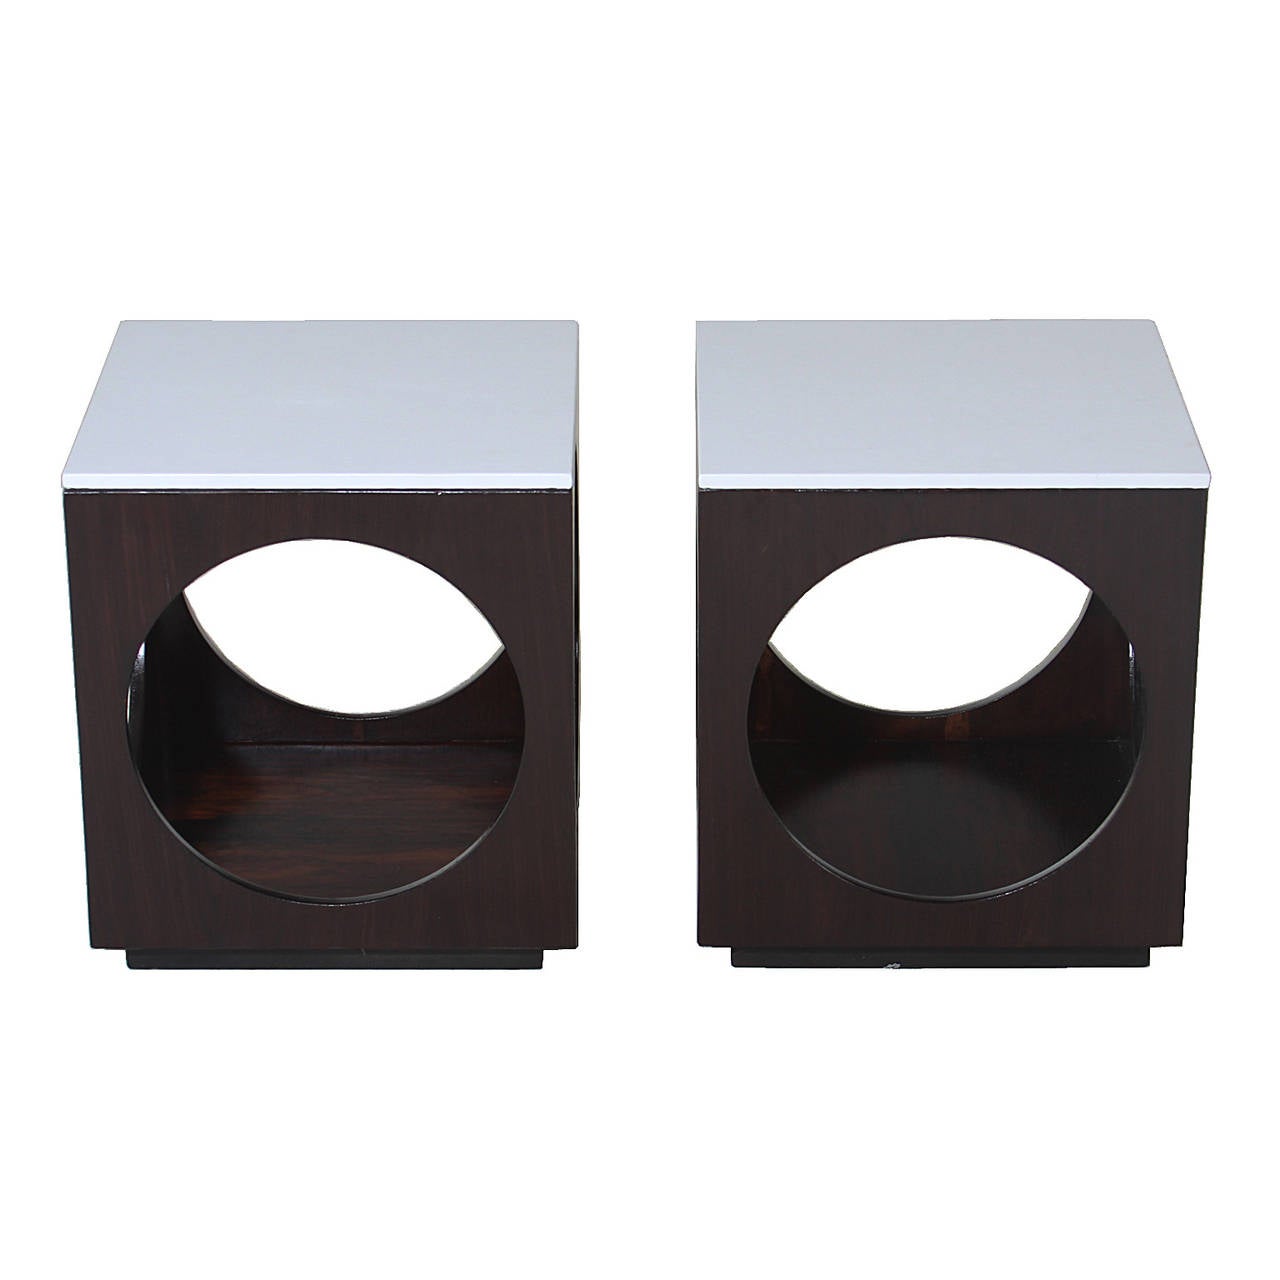 A pair of Brazilian Rosewood and Leather top side tables. The top is upholstered in a white leather and each side of the table has a large cut out circle creating a unique design element. 

Many pieces are stored in our warehouse, so please click